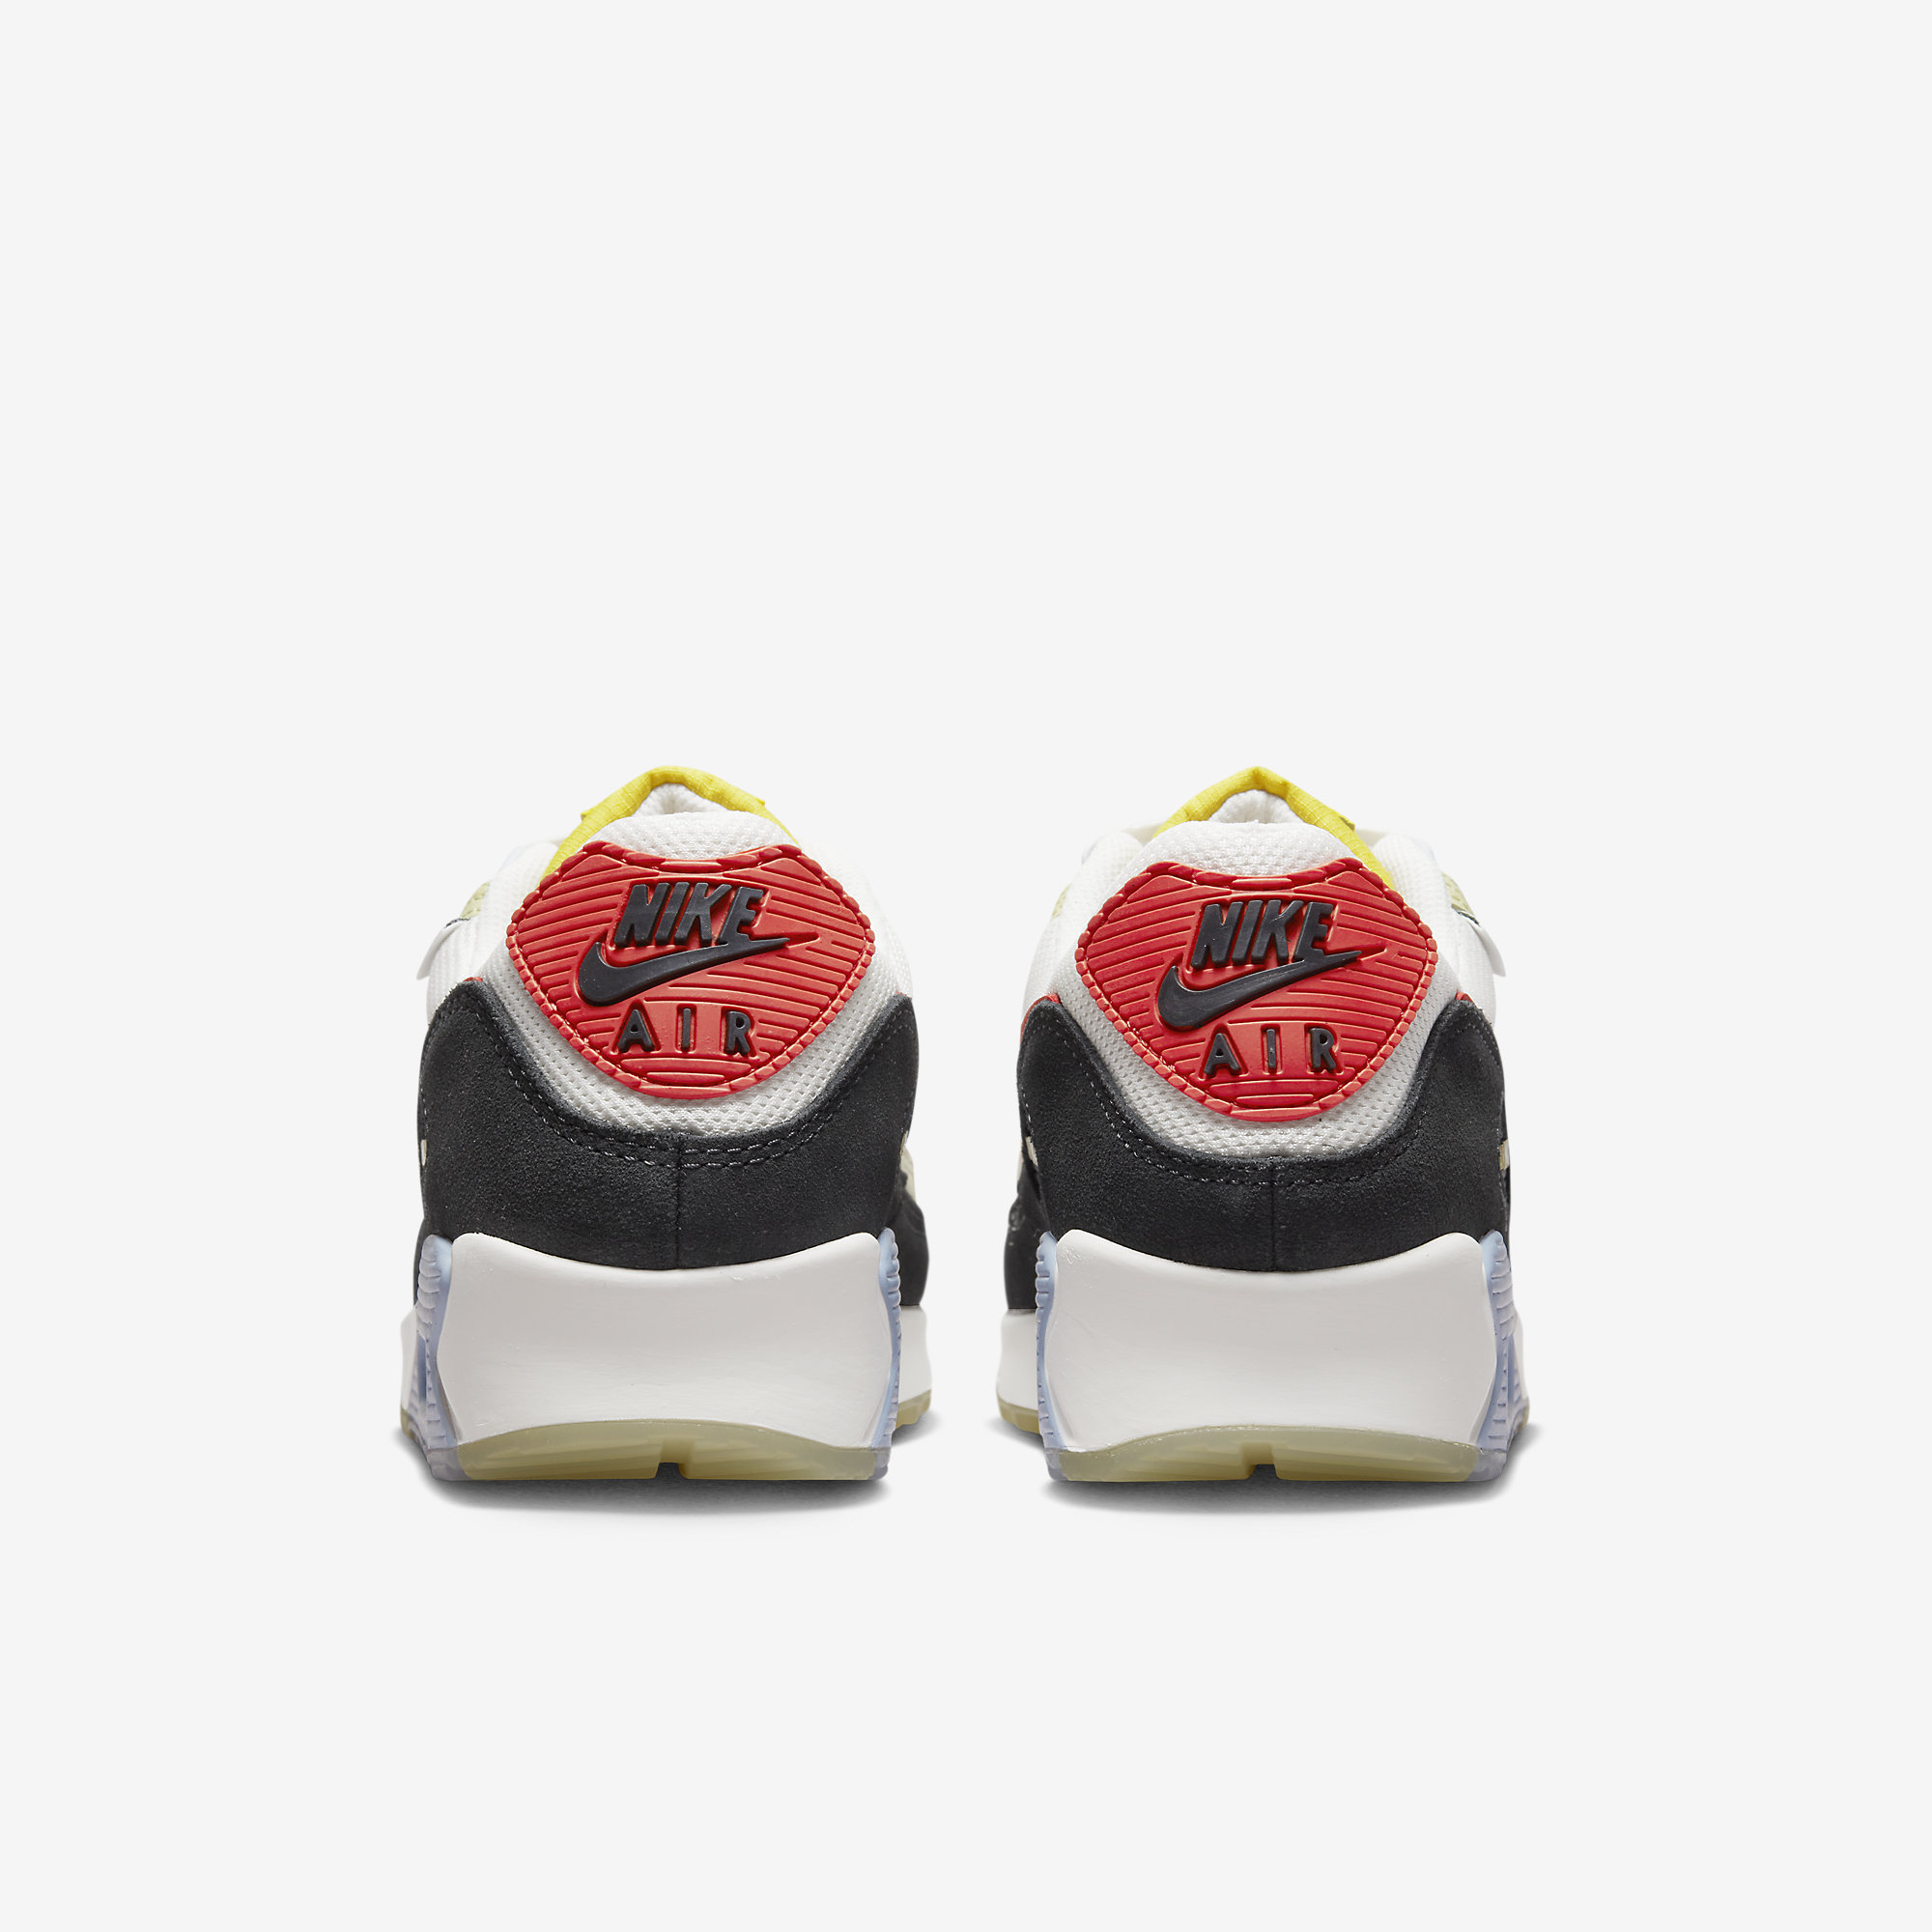 nike air max 90 set to rise dv2116 700 release date 6